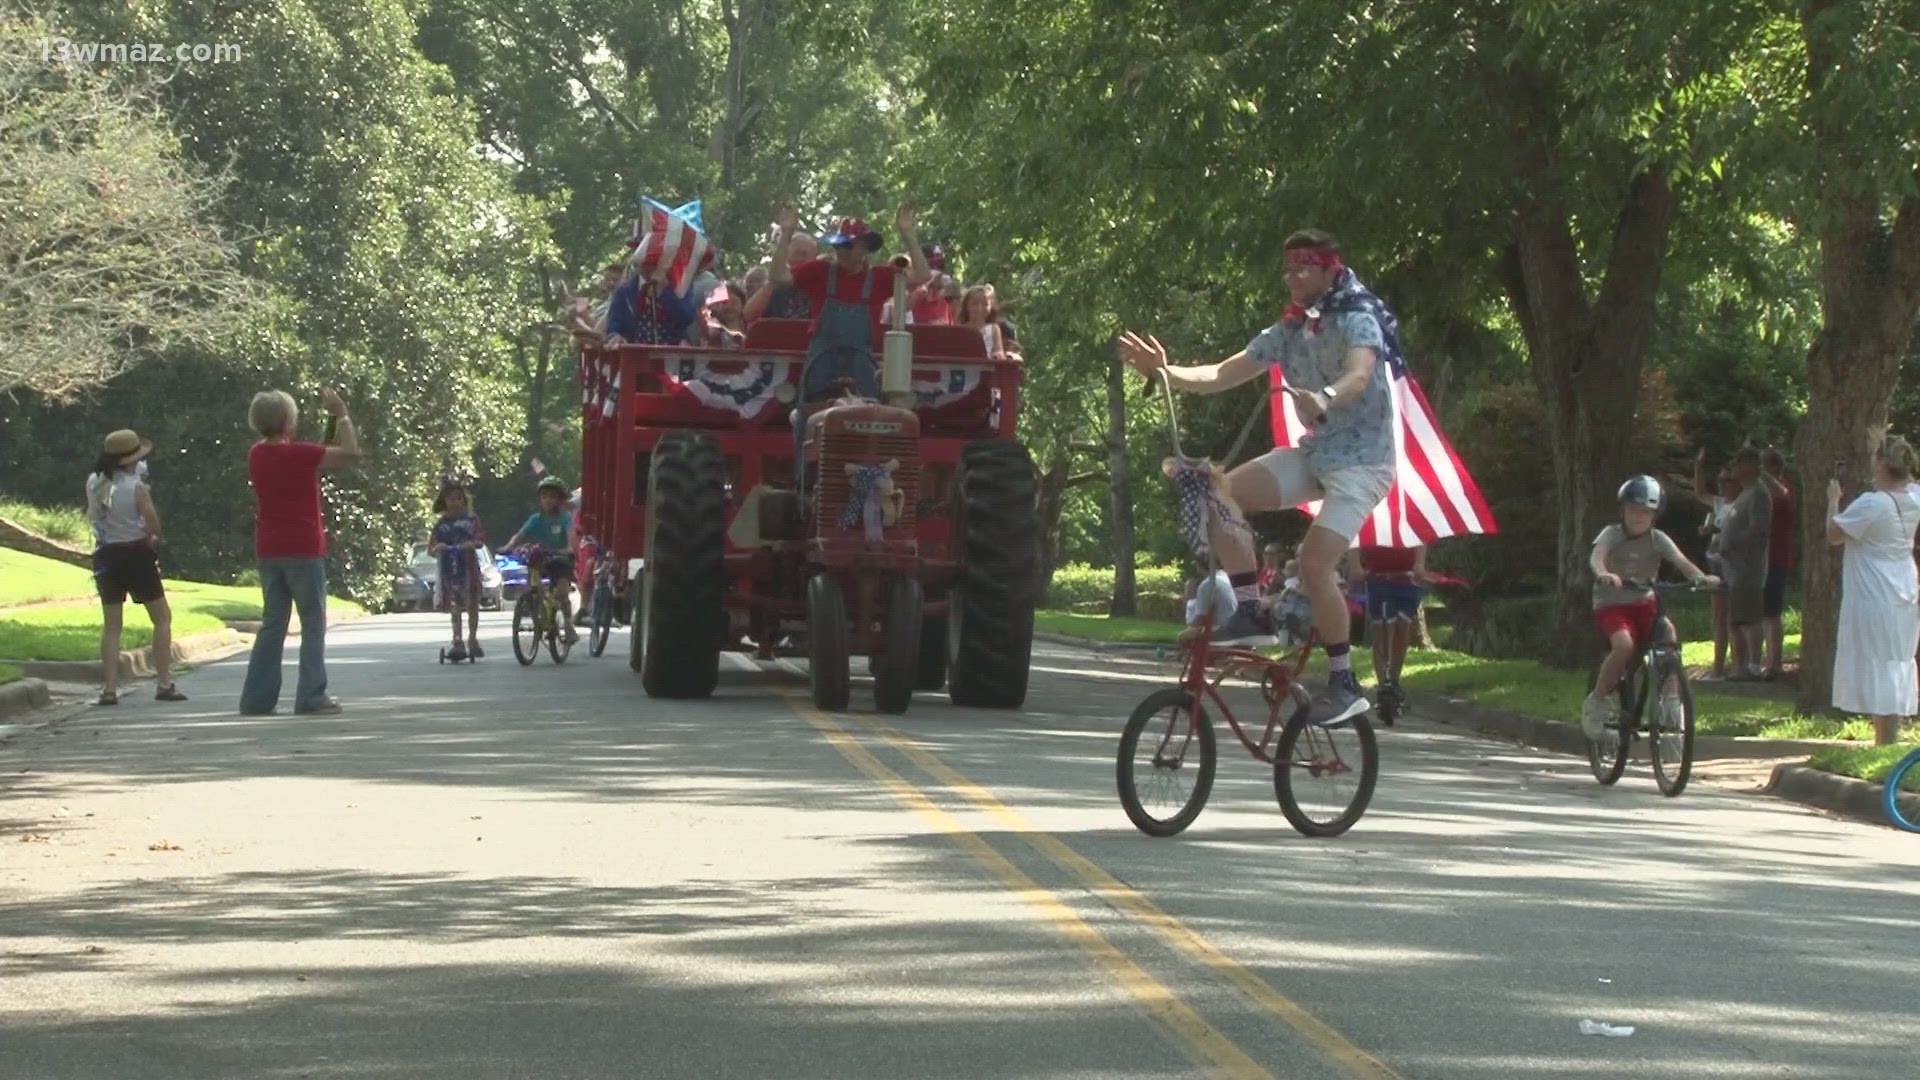 The neighborhood used to put on a July Fourth parade over 30 years ago. It took a 20 year break, but now it's back!